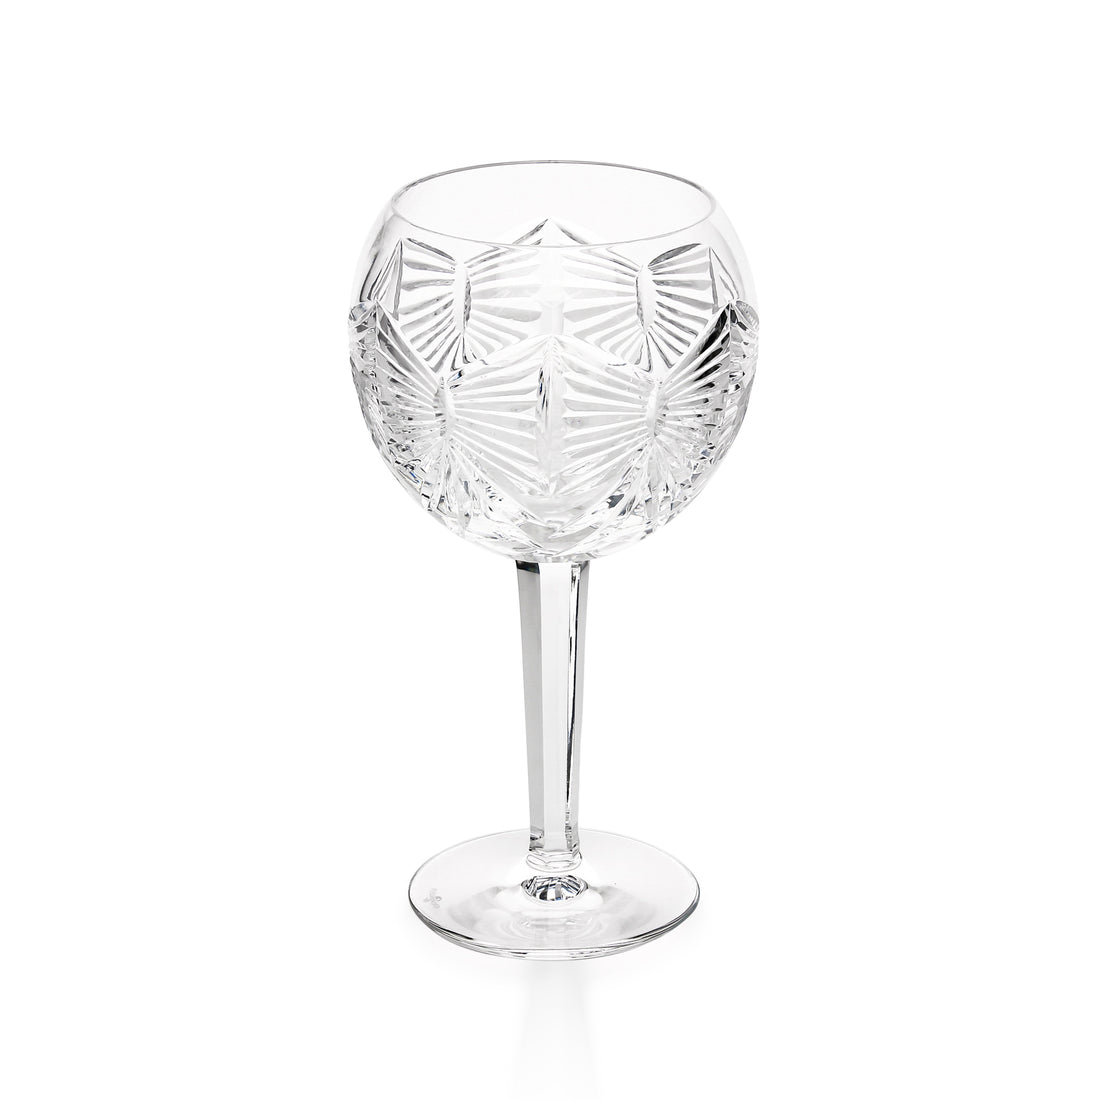 WATERFORD Millennium Happiness Balloon Goblets - Set of 2